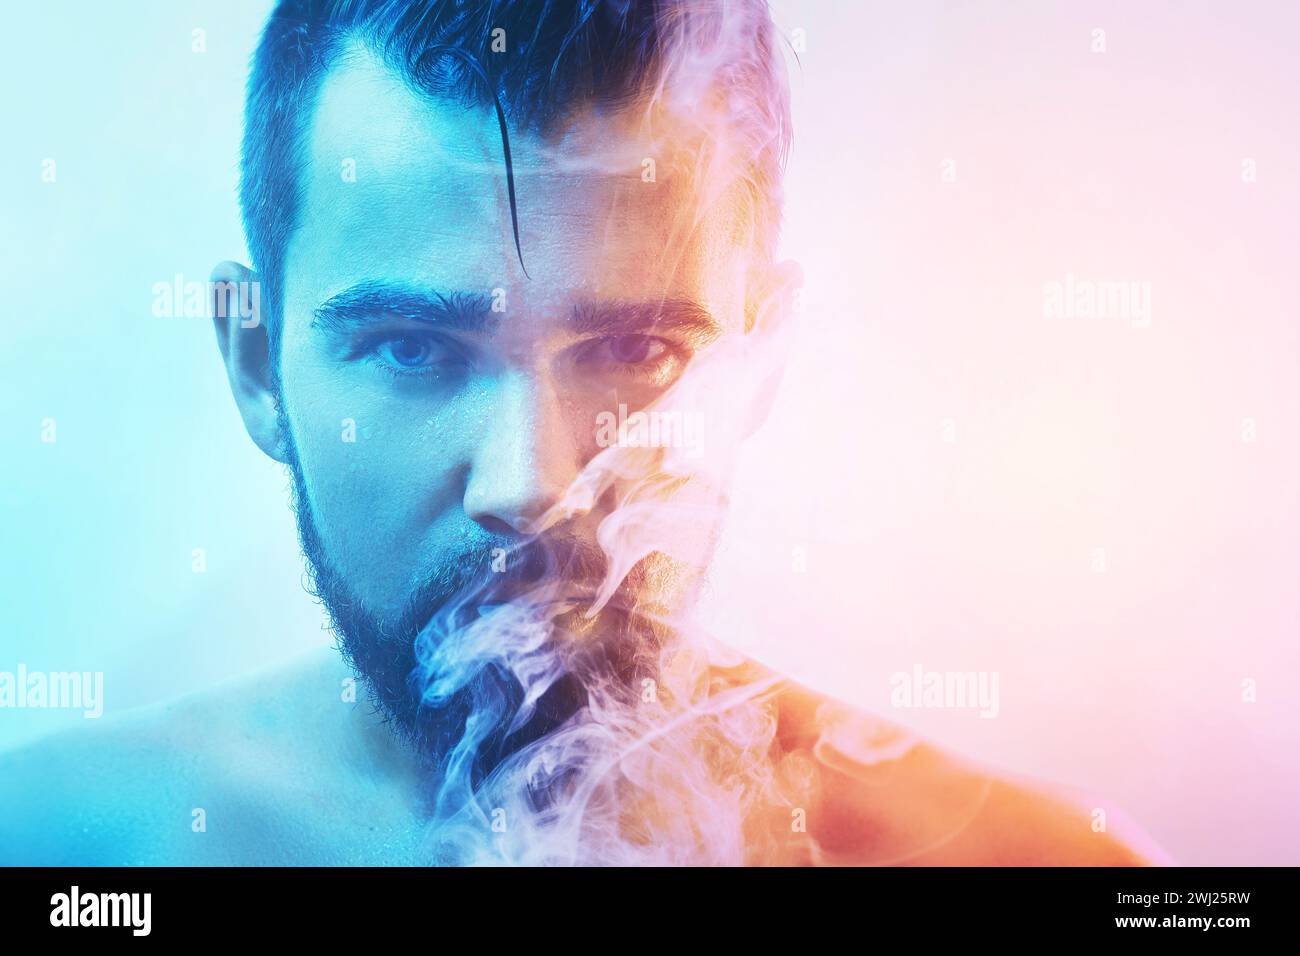 Handsome young man with wet skin in colorful light smoking cigarette or marijuana Stock Photo